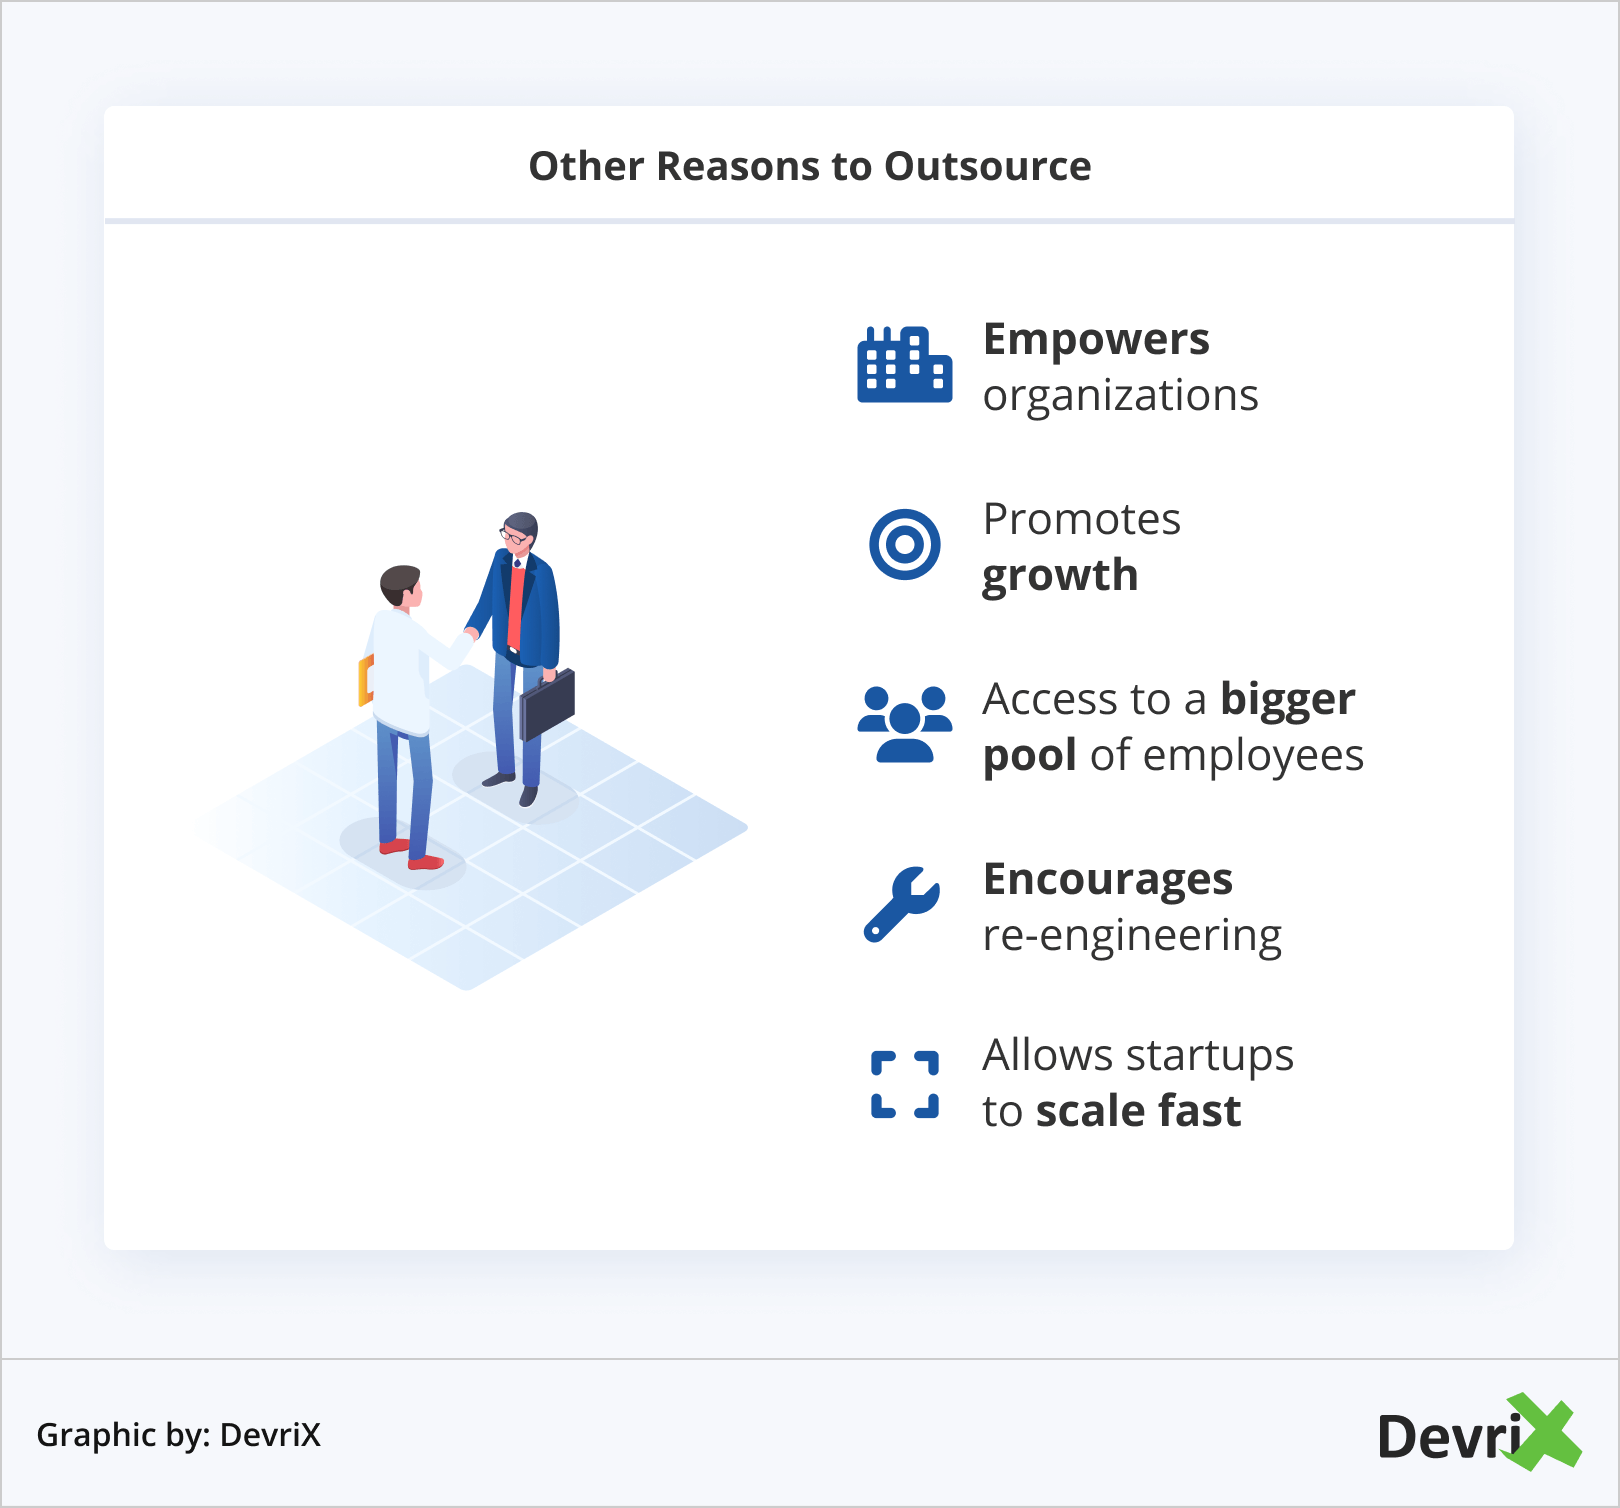 Other Reasons to Outsource